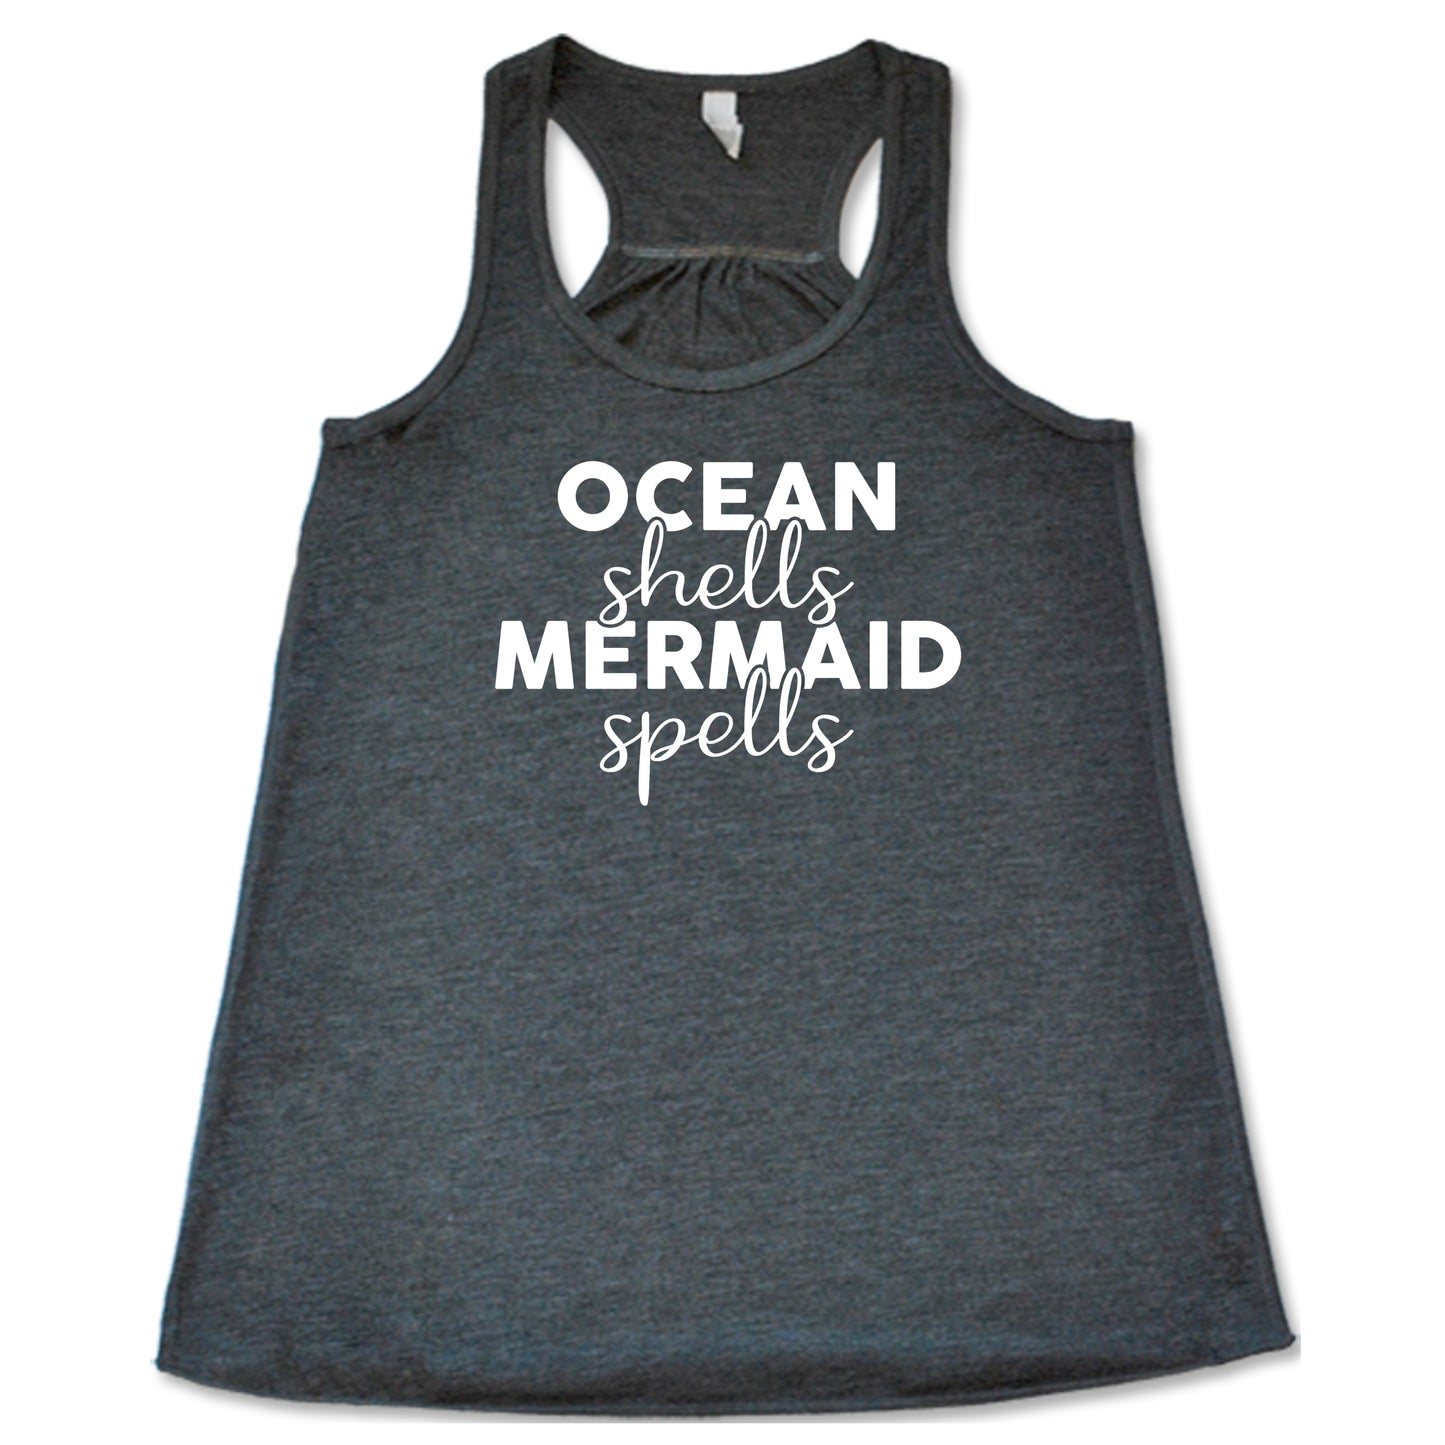 grey racerback tank with the saying "ocean shells mermaid spells" in white in the center